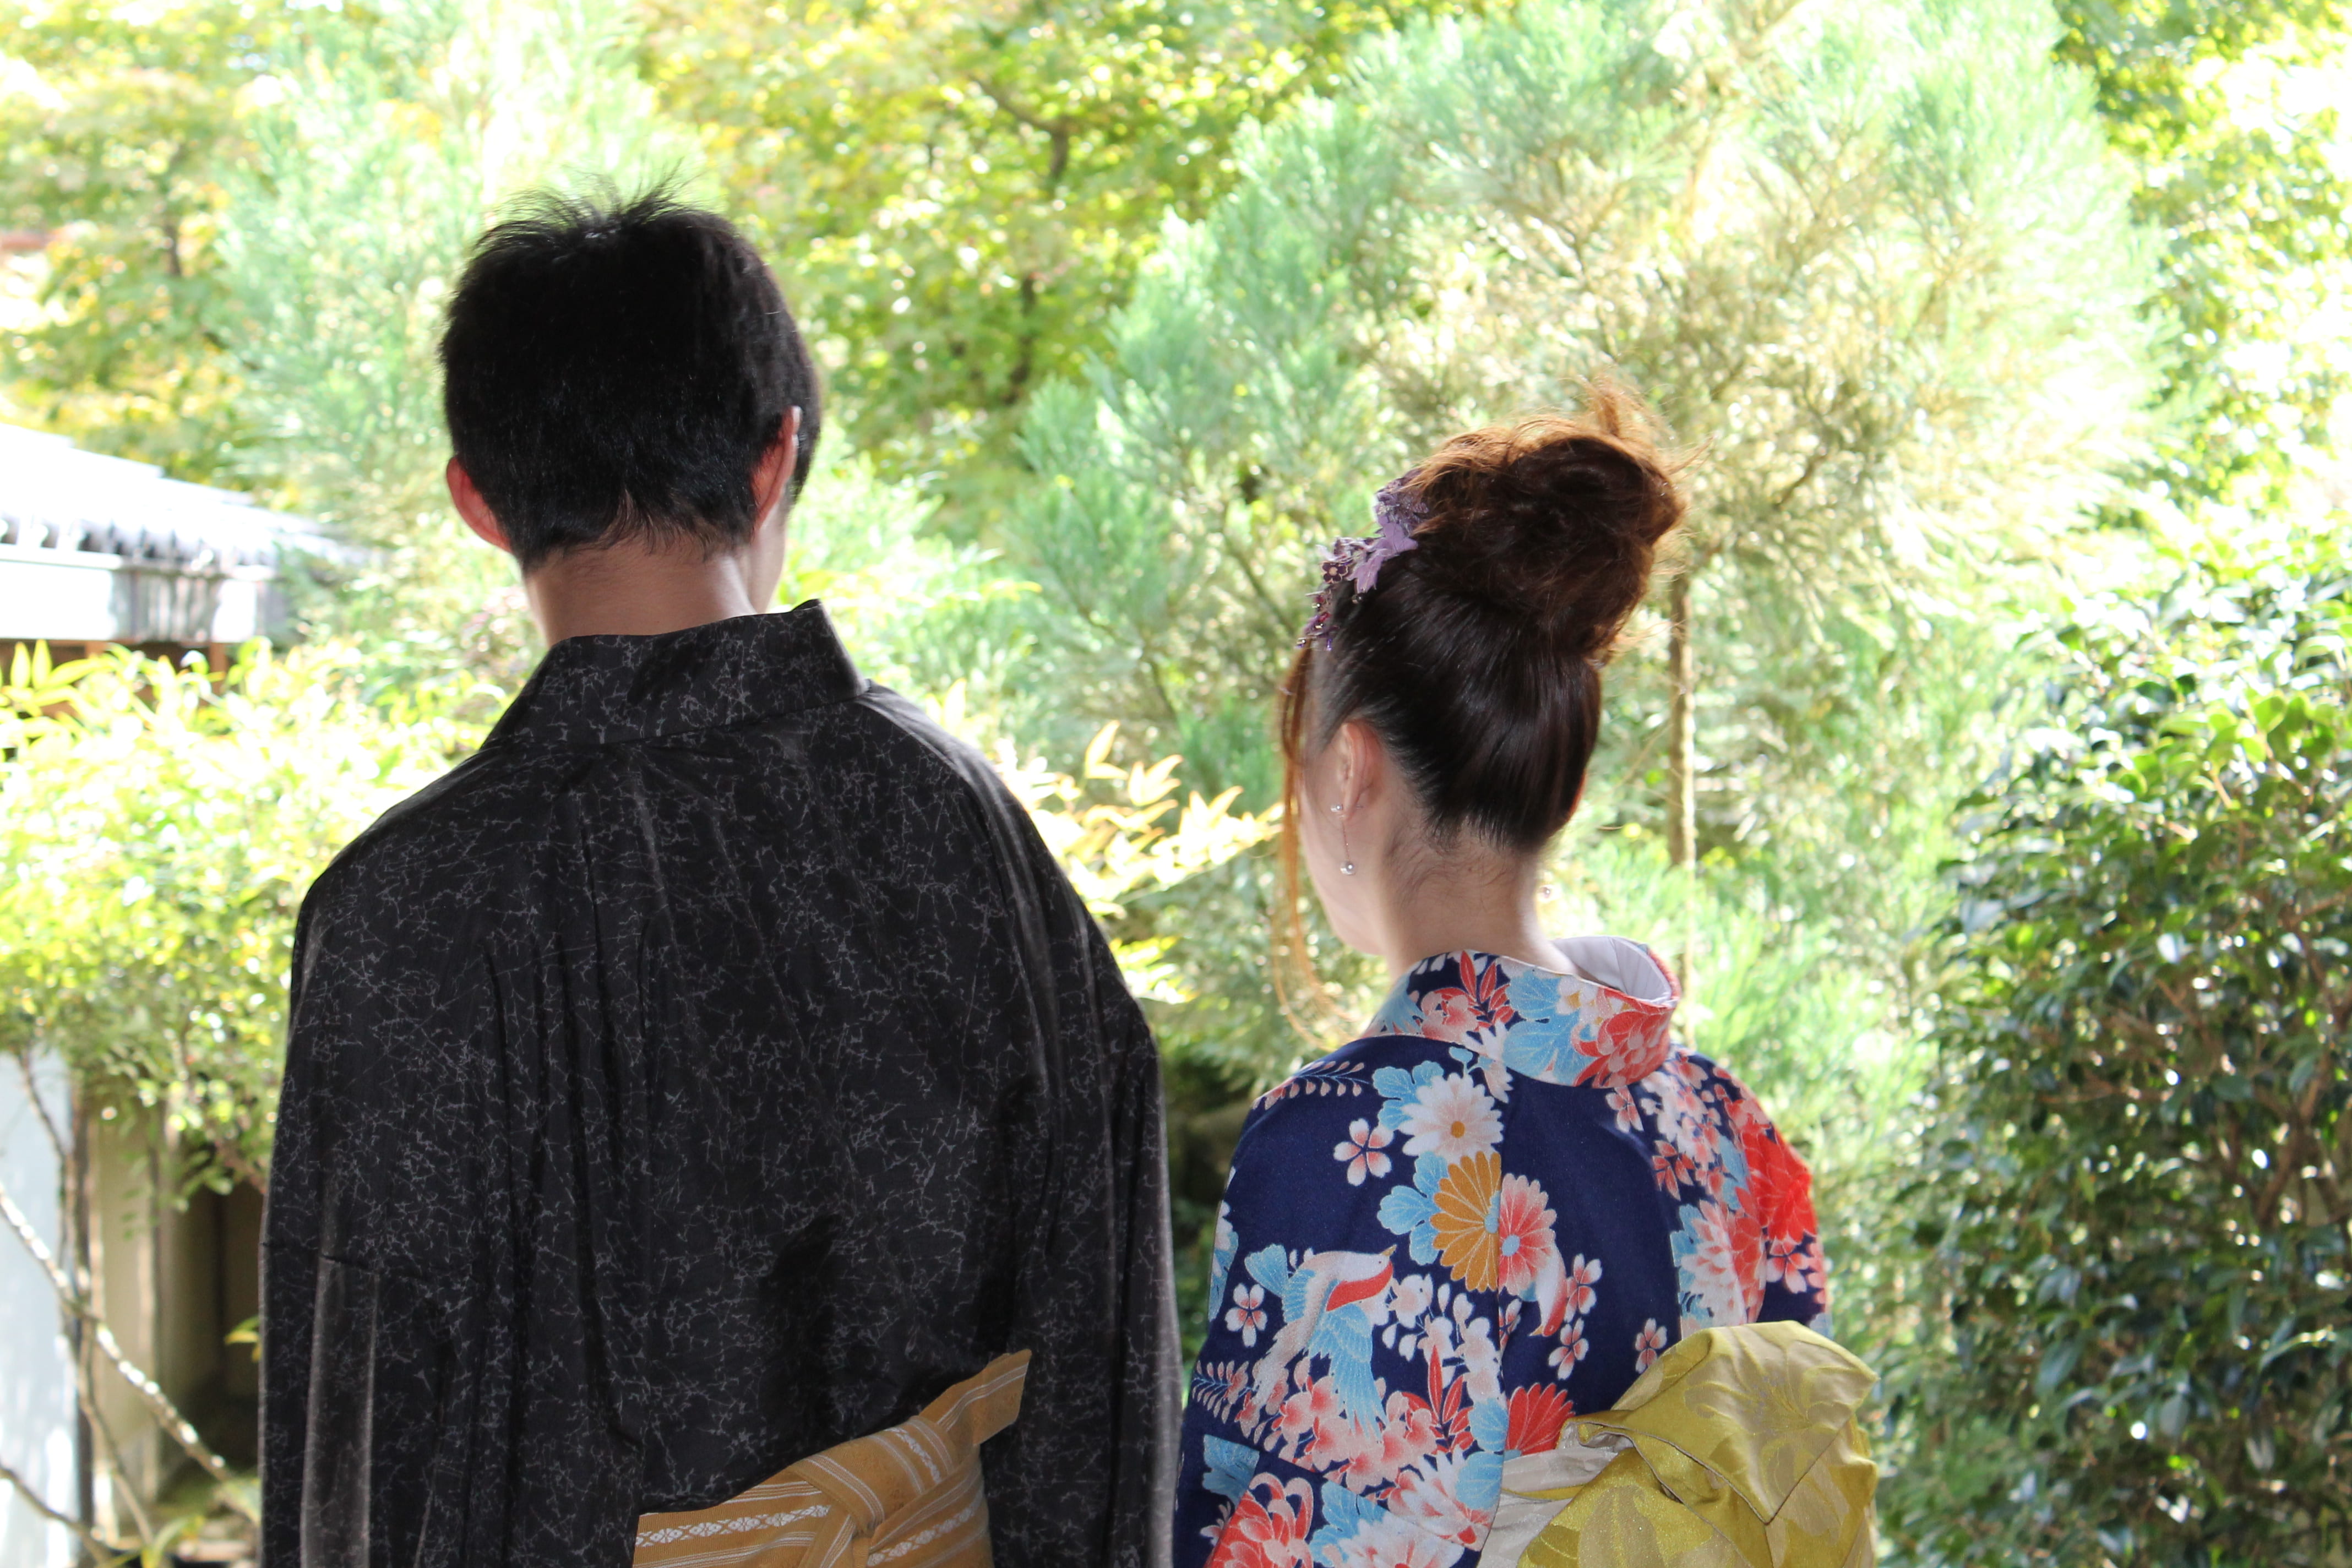 Kyoto newlyweds going sightseeing in search of their roots